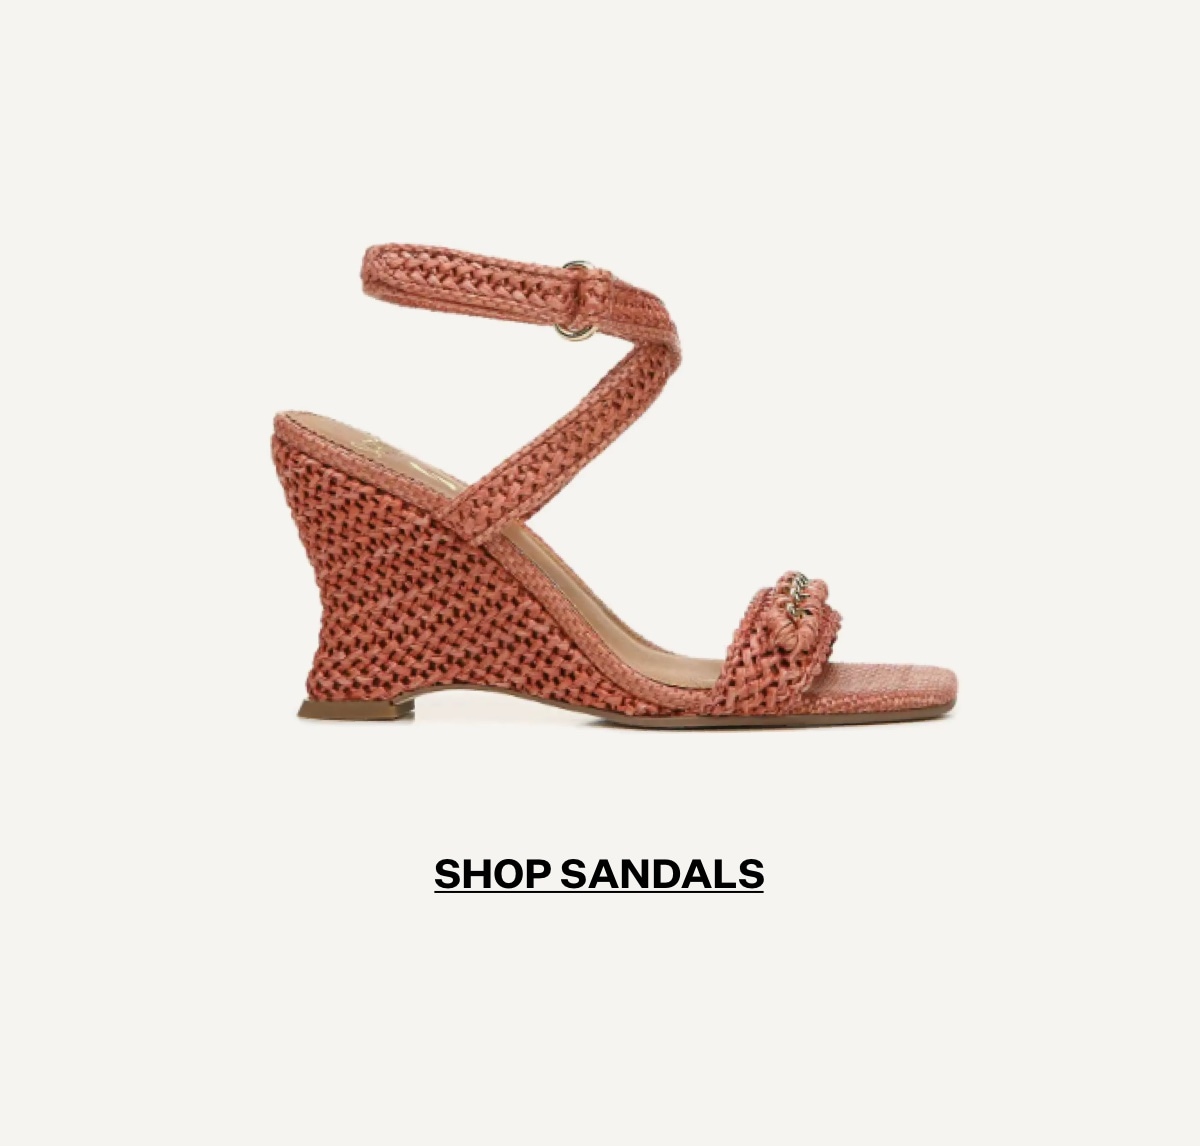 Category Sandals